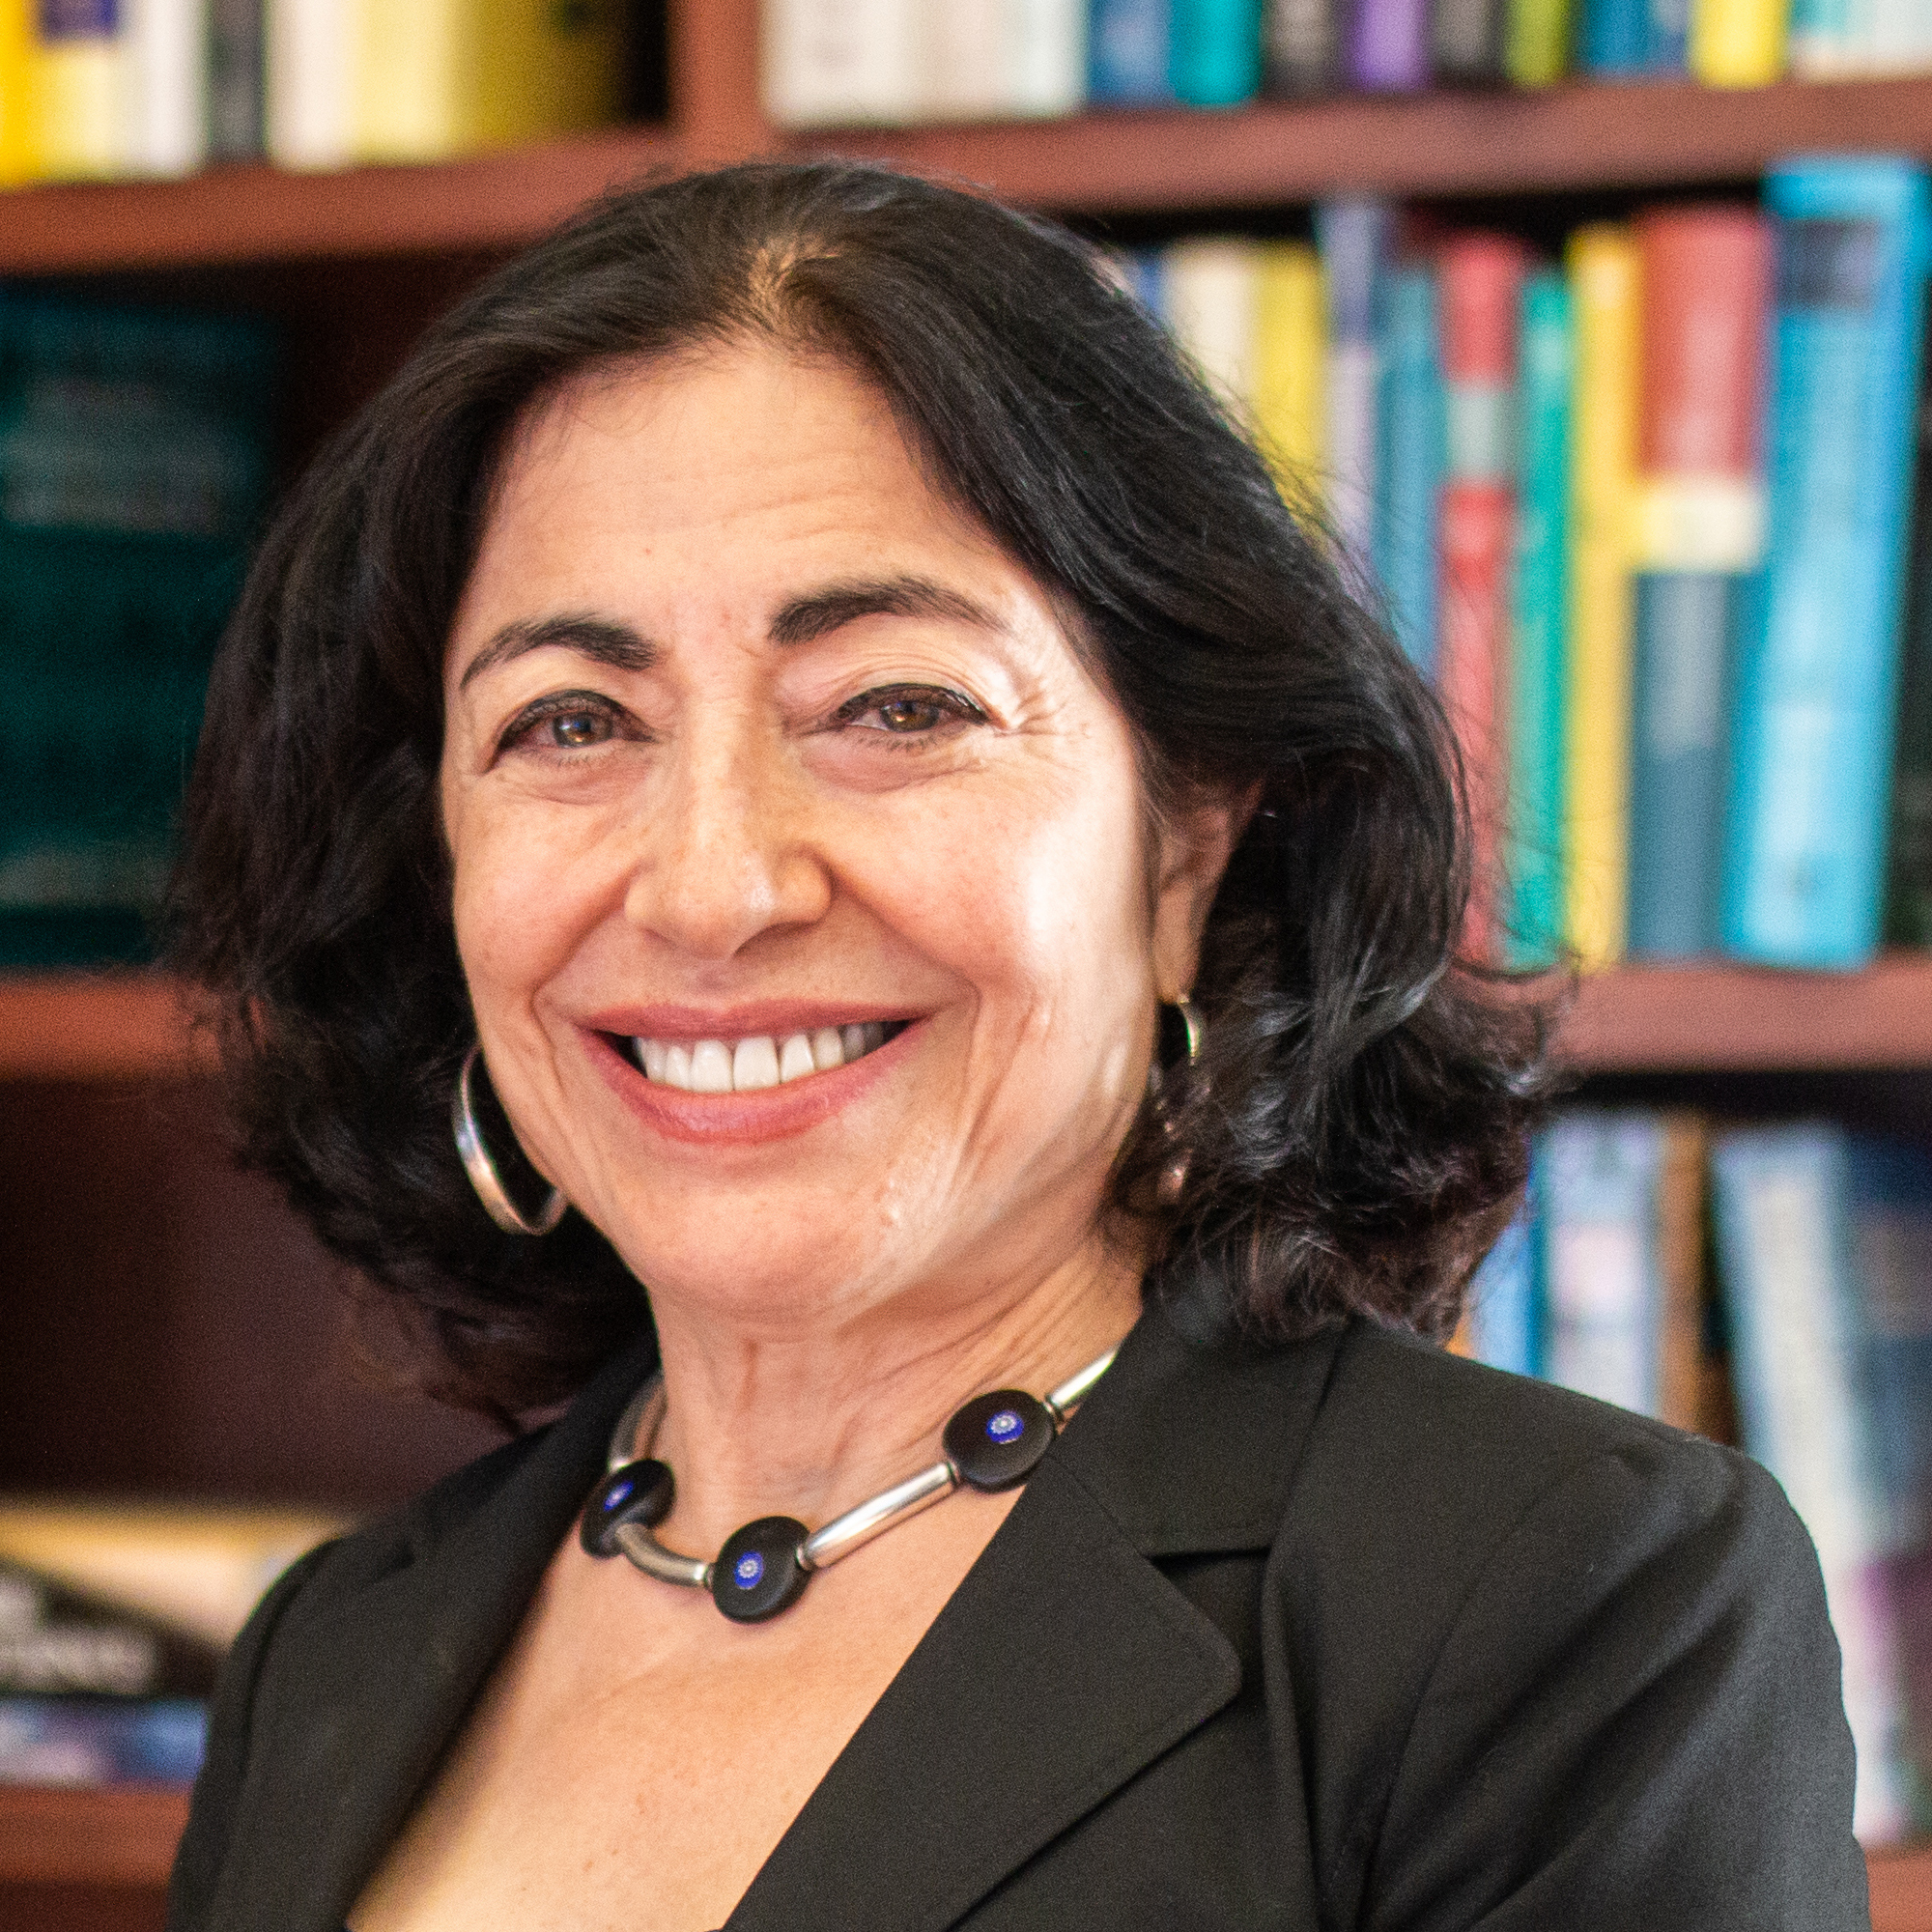 Portrait of Dean Jennifer Chayes wearing a black suit and posing in front of a bookshelf